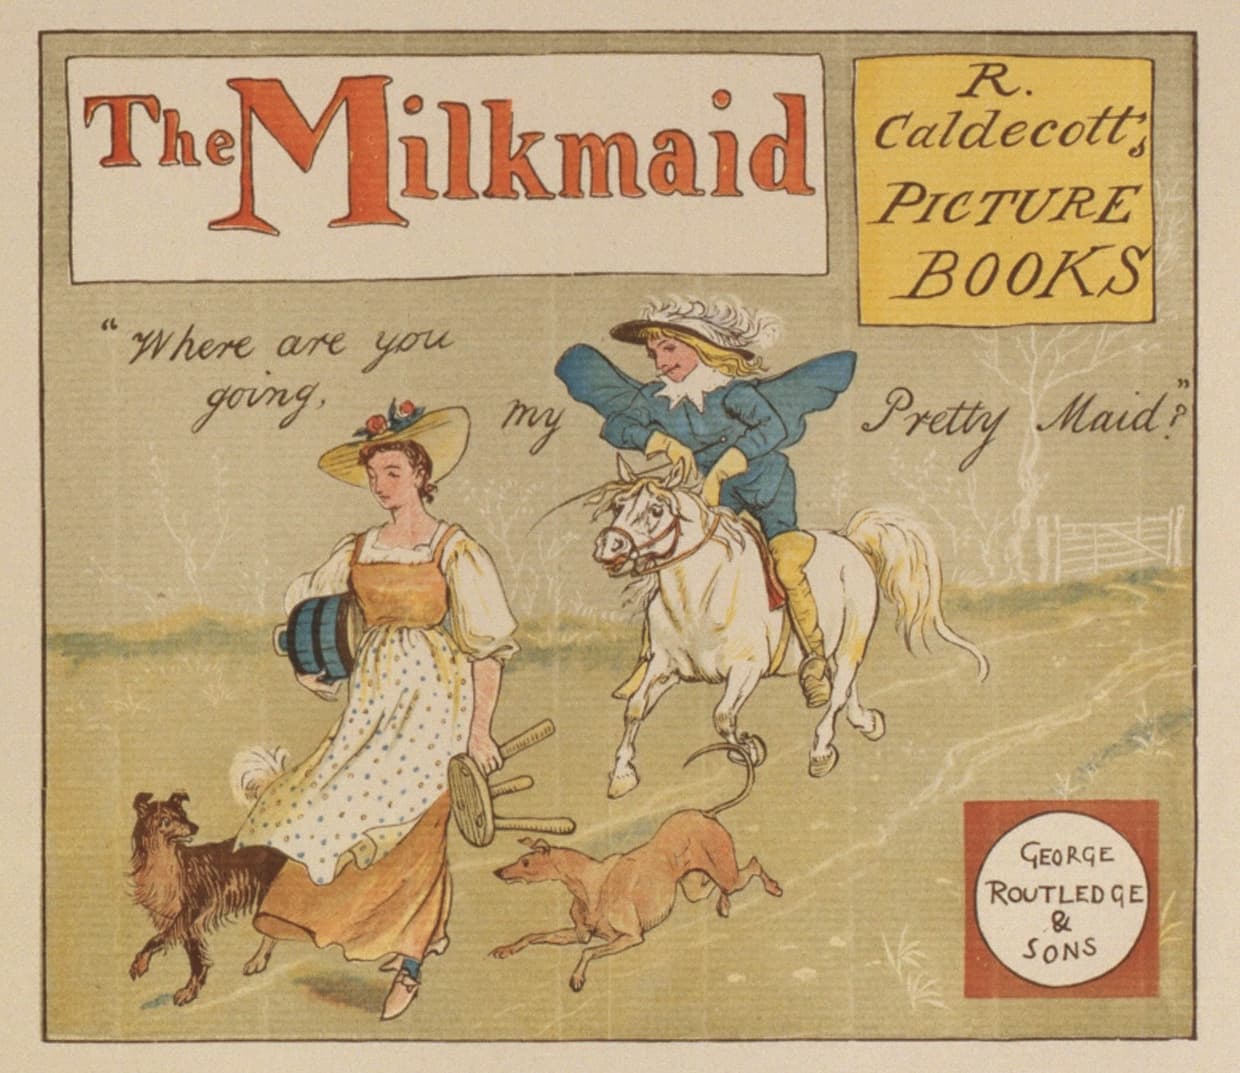 Front cover of The Milkmaid (page 291 of The Complete Collection of PICTURES and SONGS)